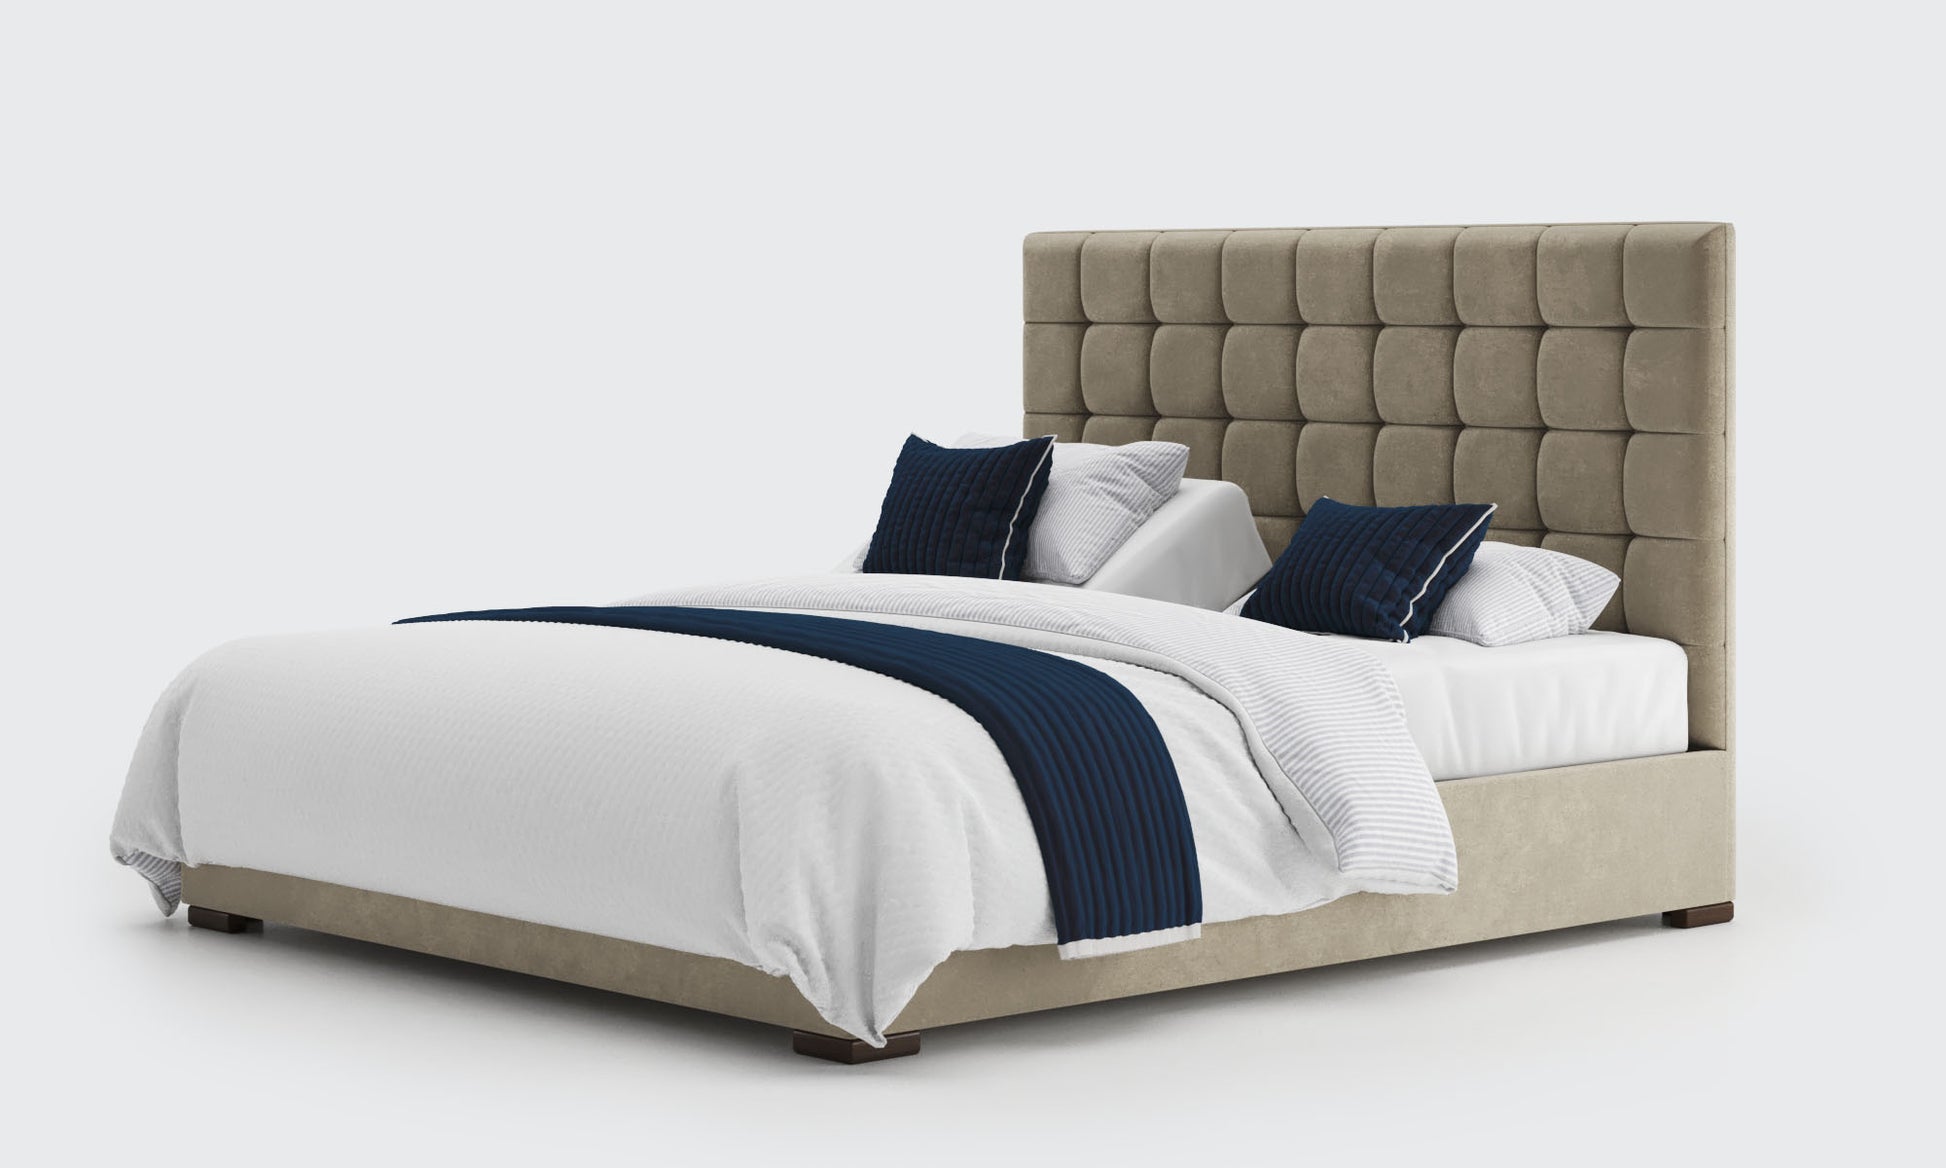 stratton 6ft super king dual bed and mattresses in the cedar velvet material